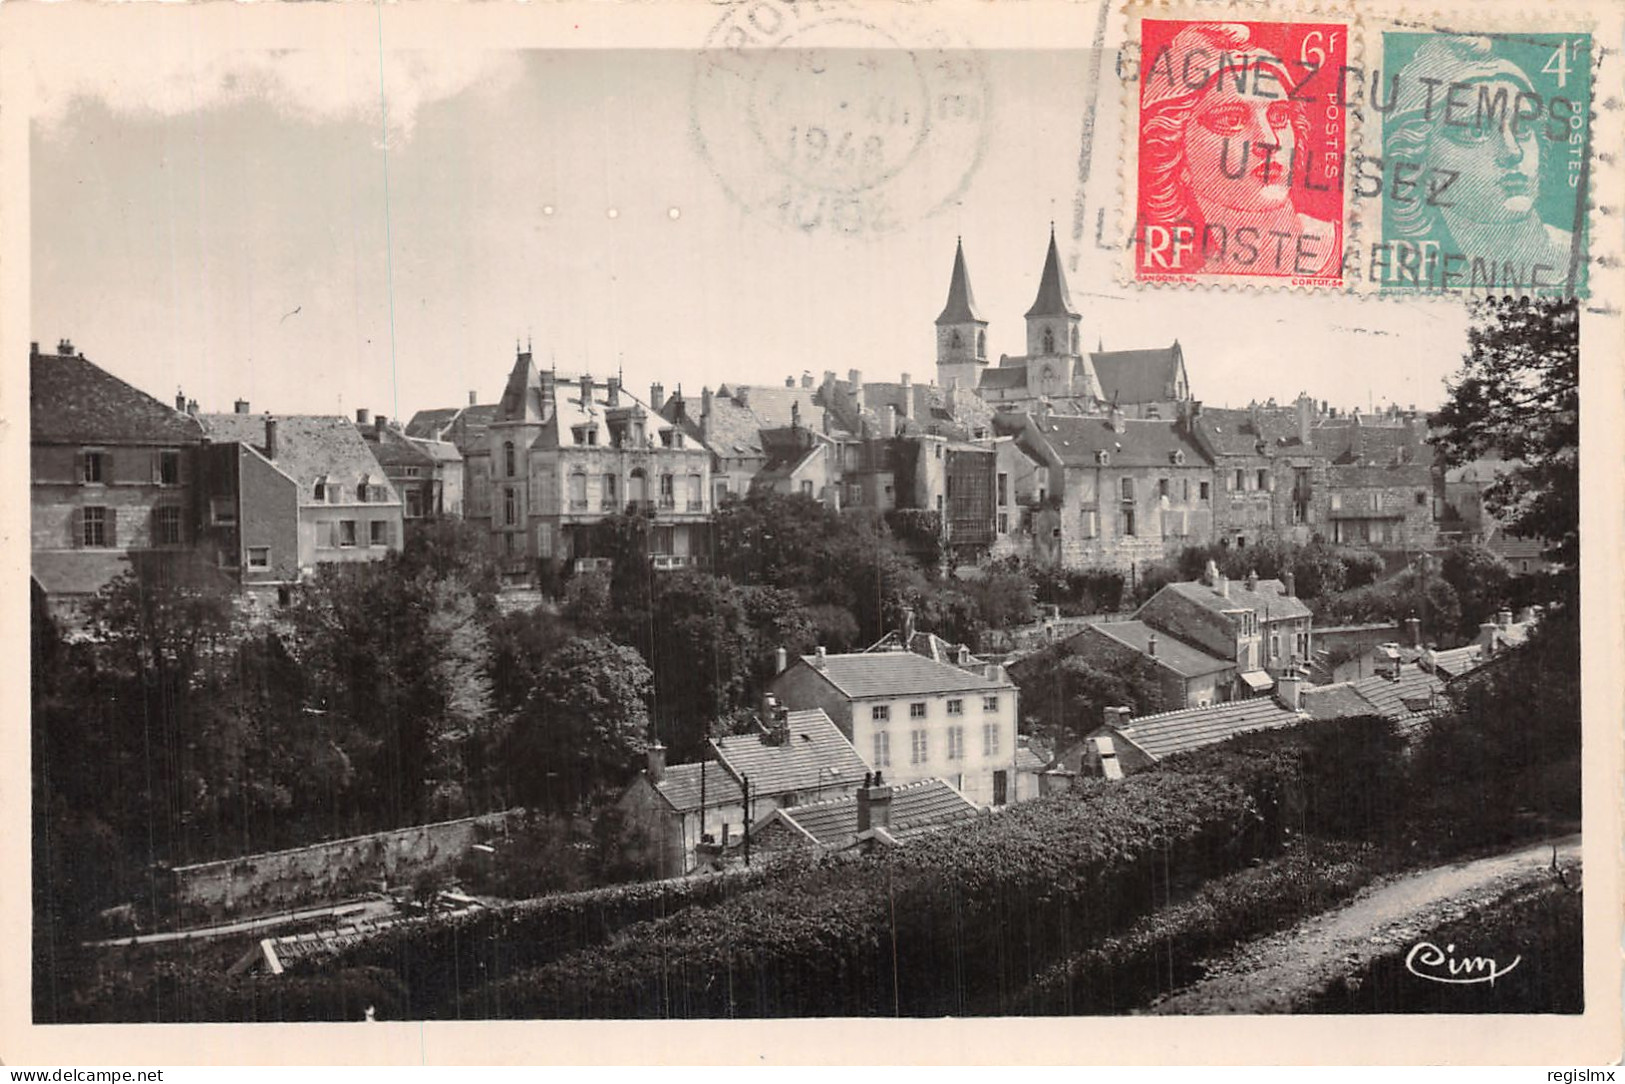 52-CHAUMONT-N°T1080-G/0061 - Chaumont